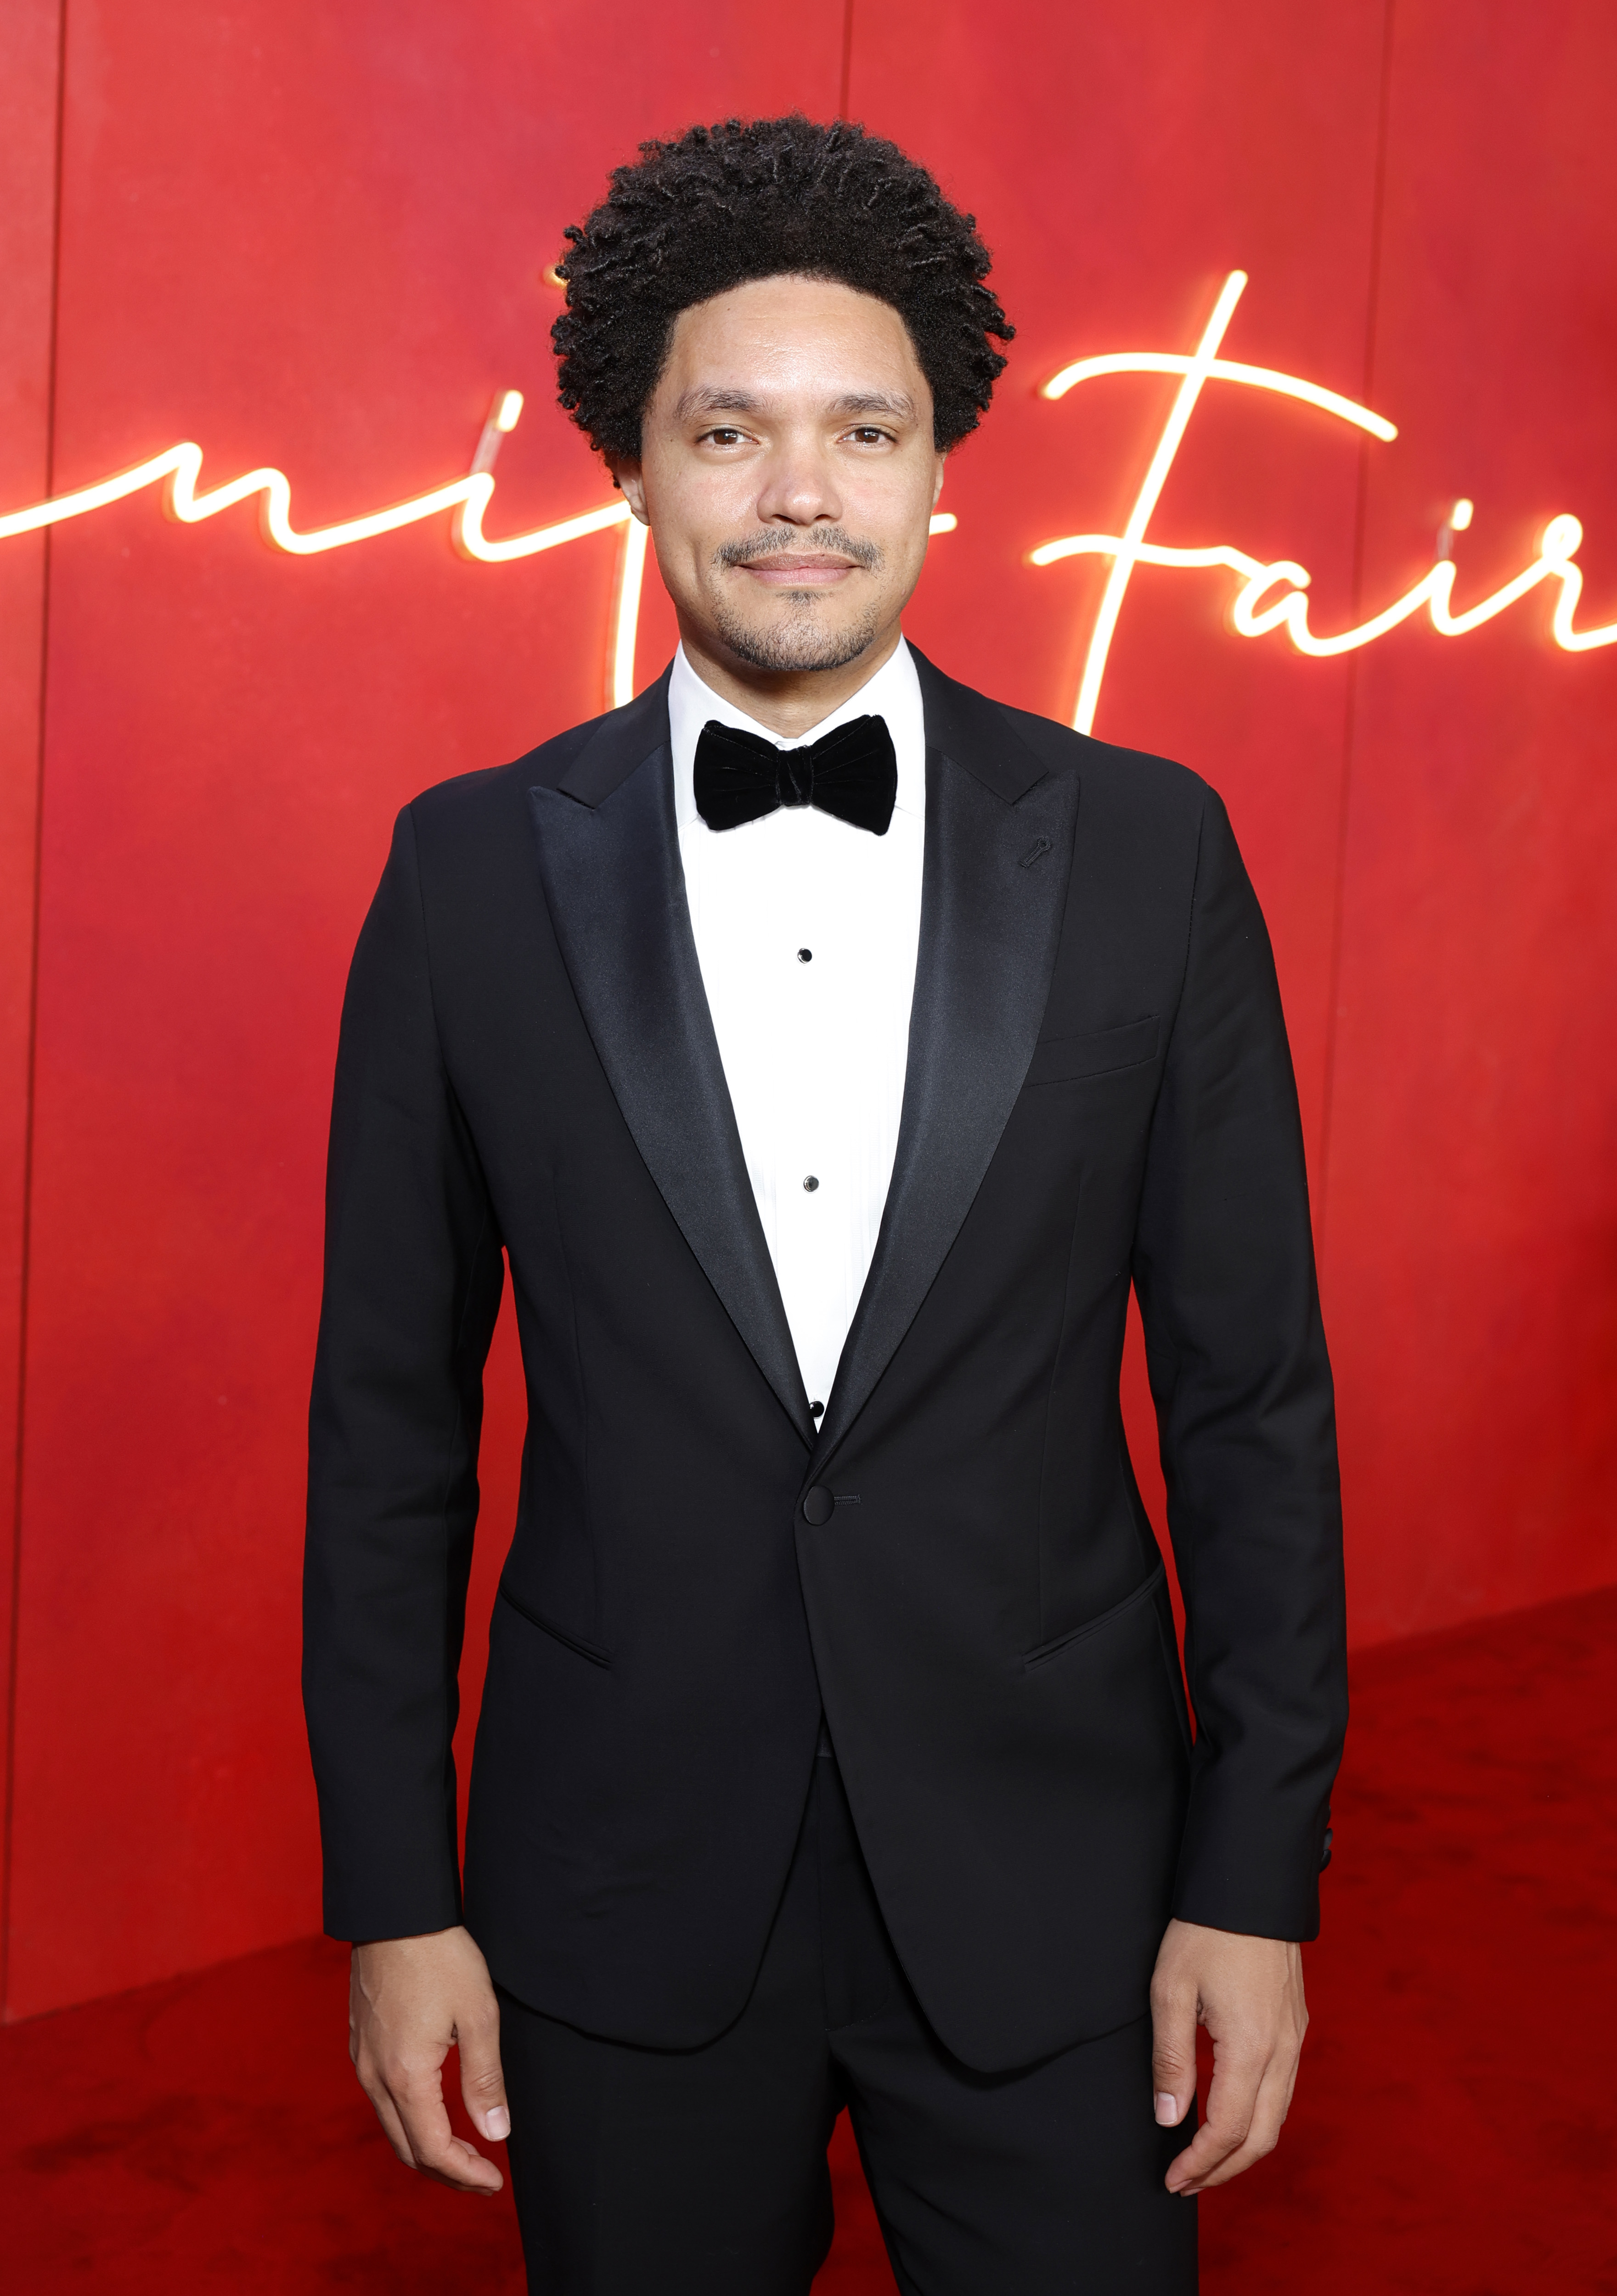 Trevor Noah dressed in a classic black tuxedo with a bowtie at the Vanity Fair event